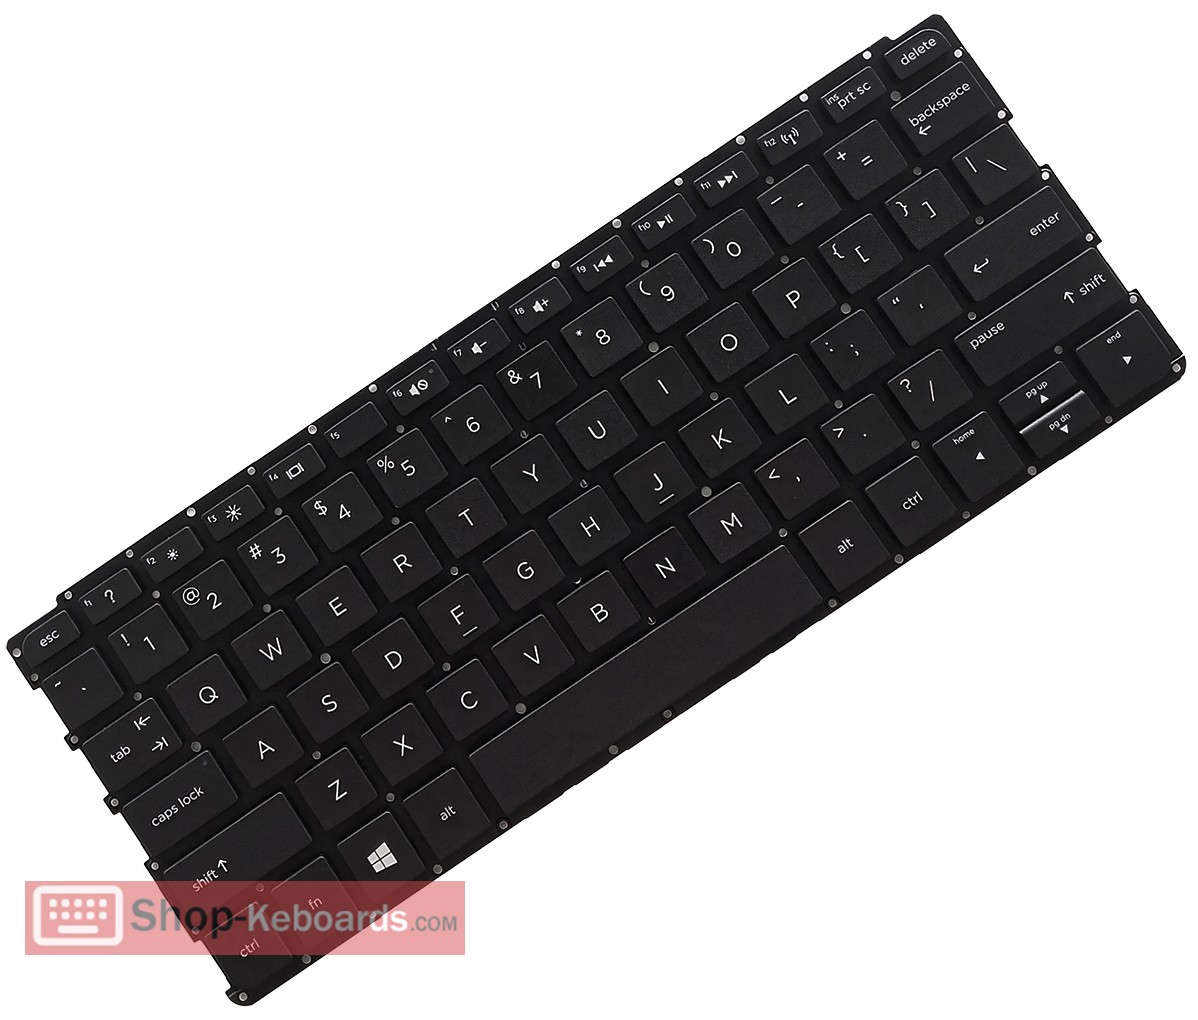 HP PAVILION 10 TOUCHSMART SERIES  Keyboard replacement